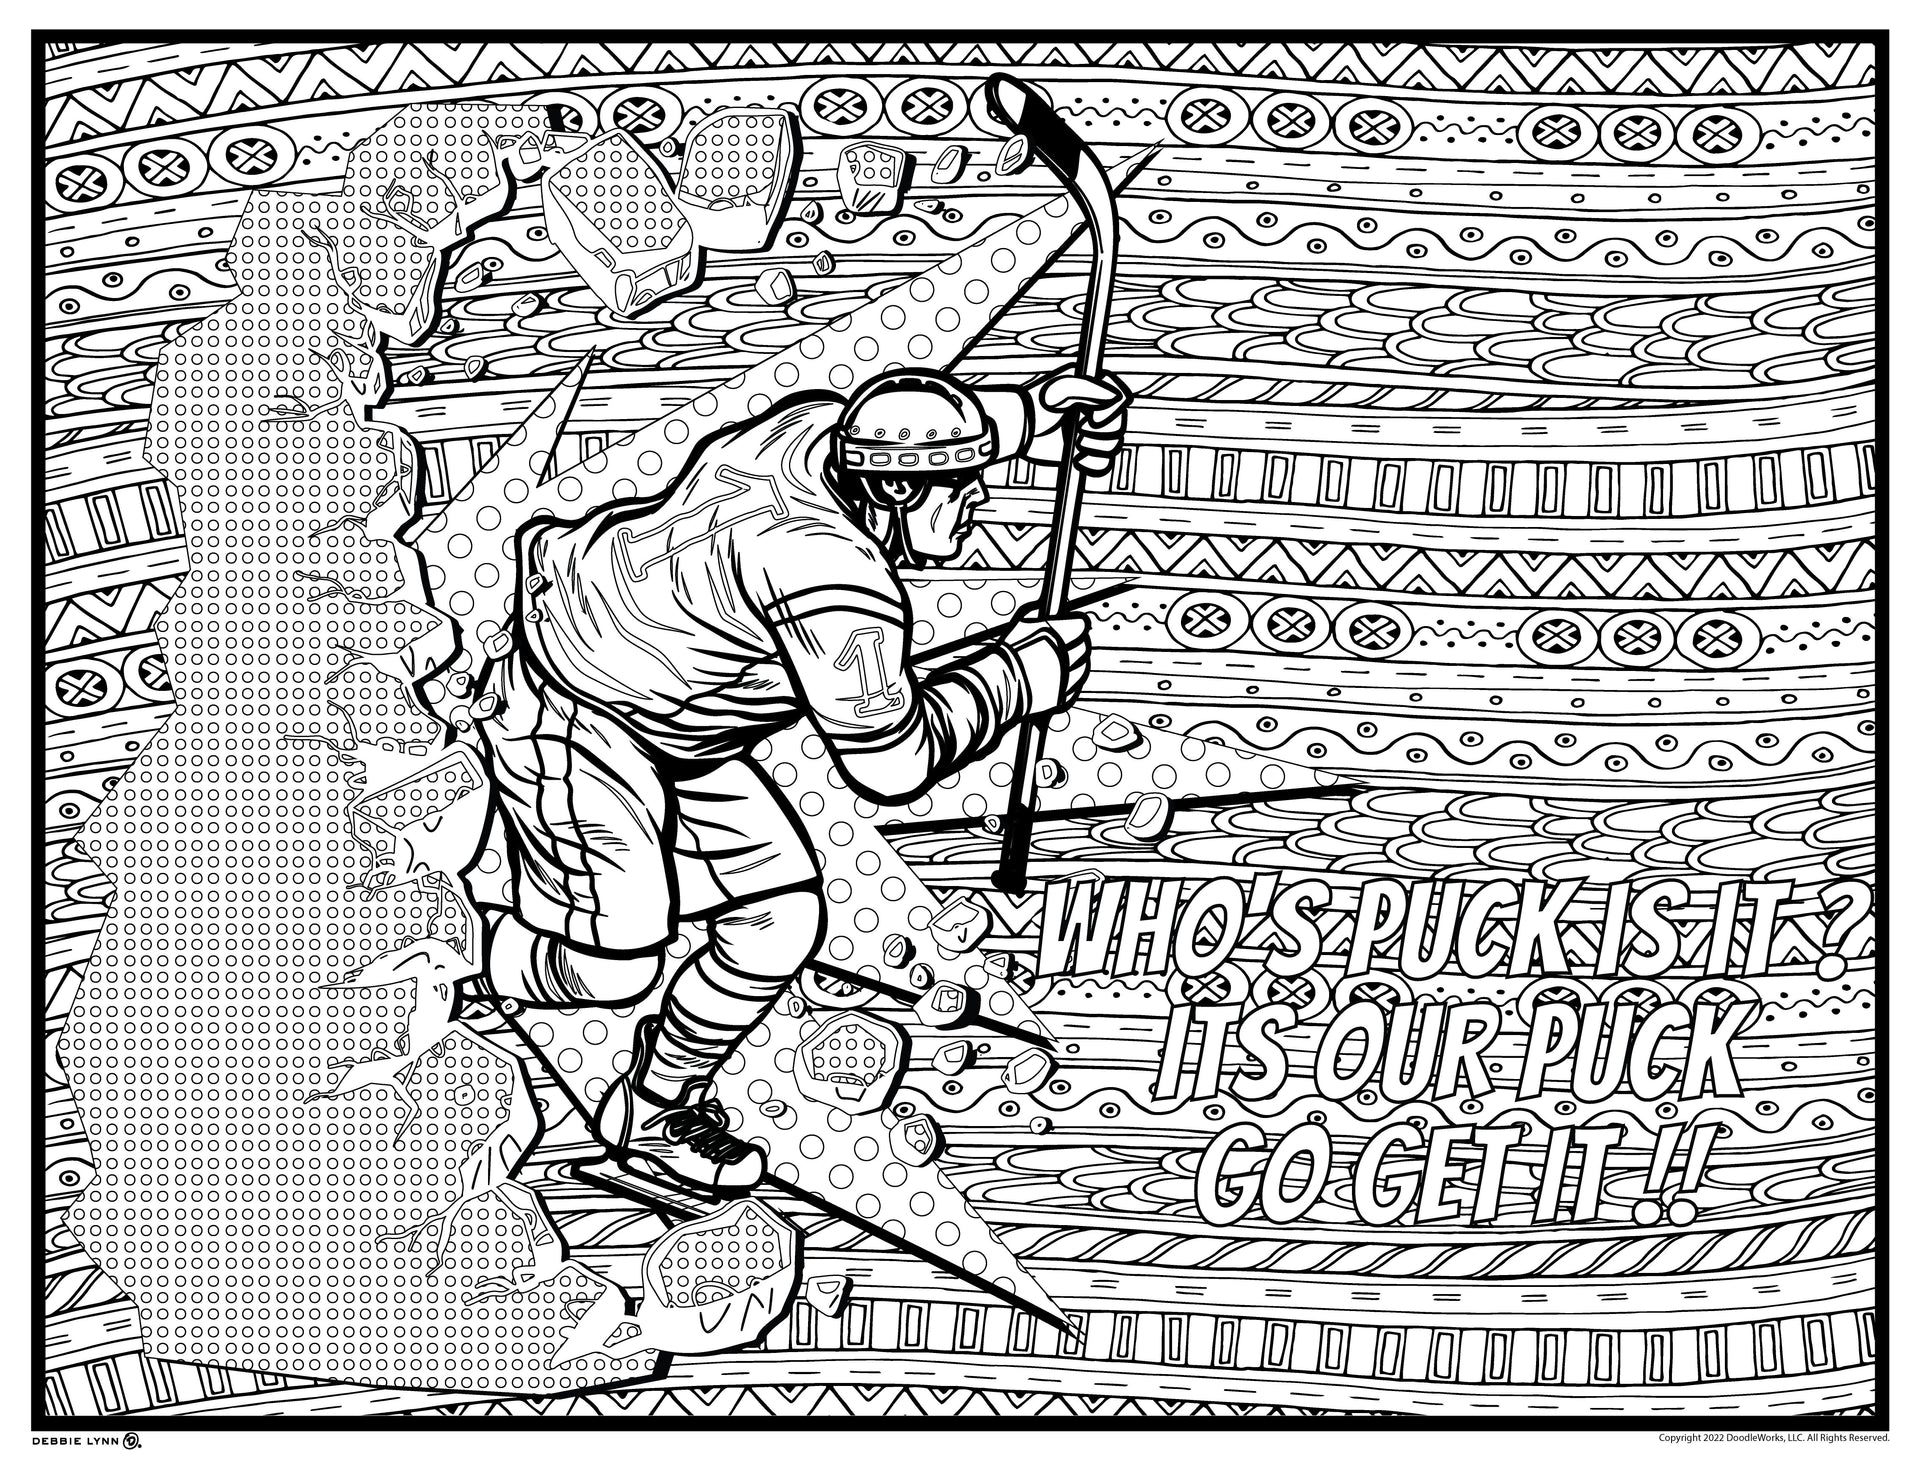 Its our puck hockey personalized giant coloring poster x â debbie lynn